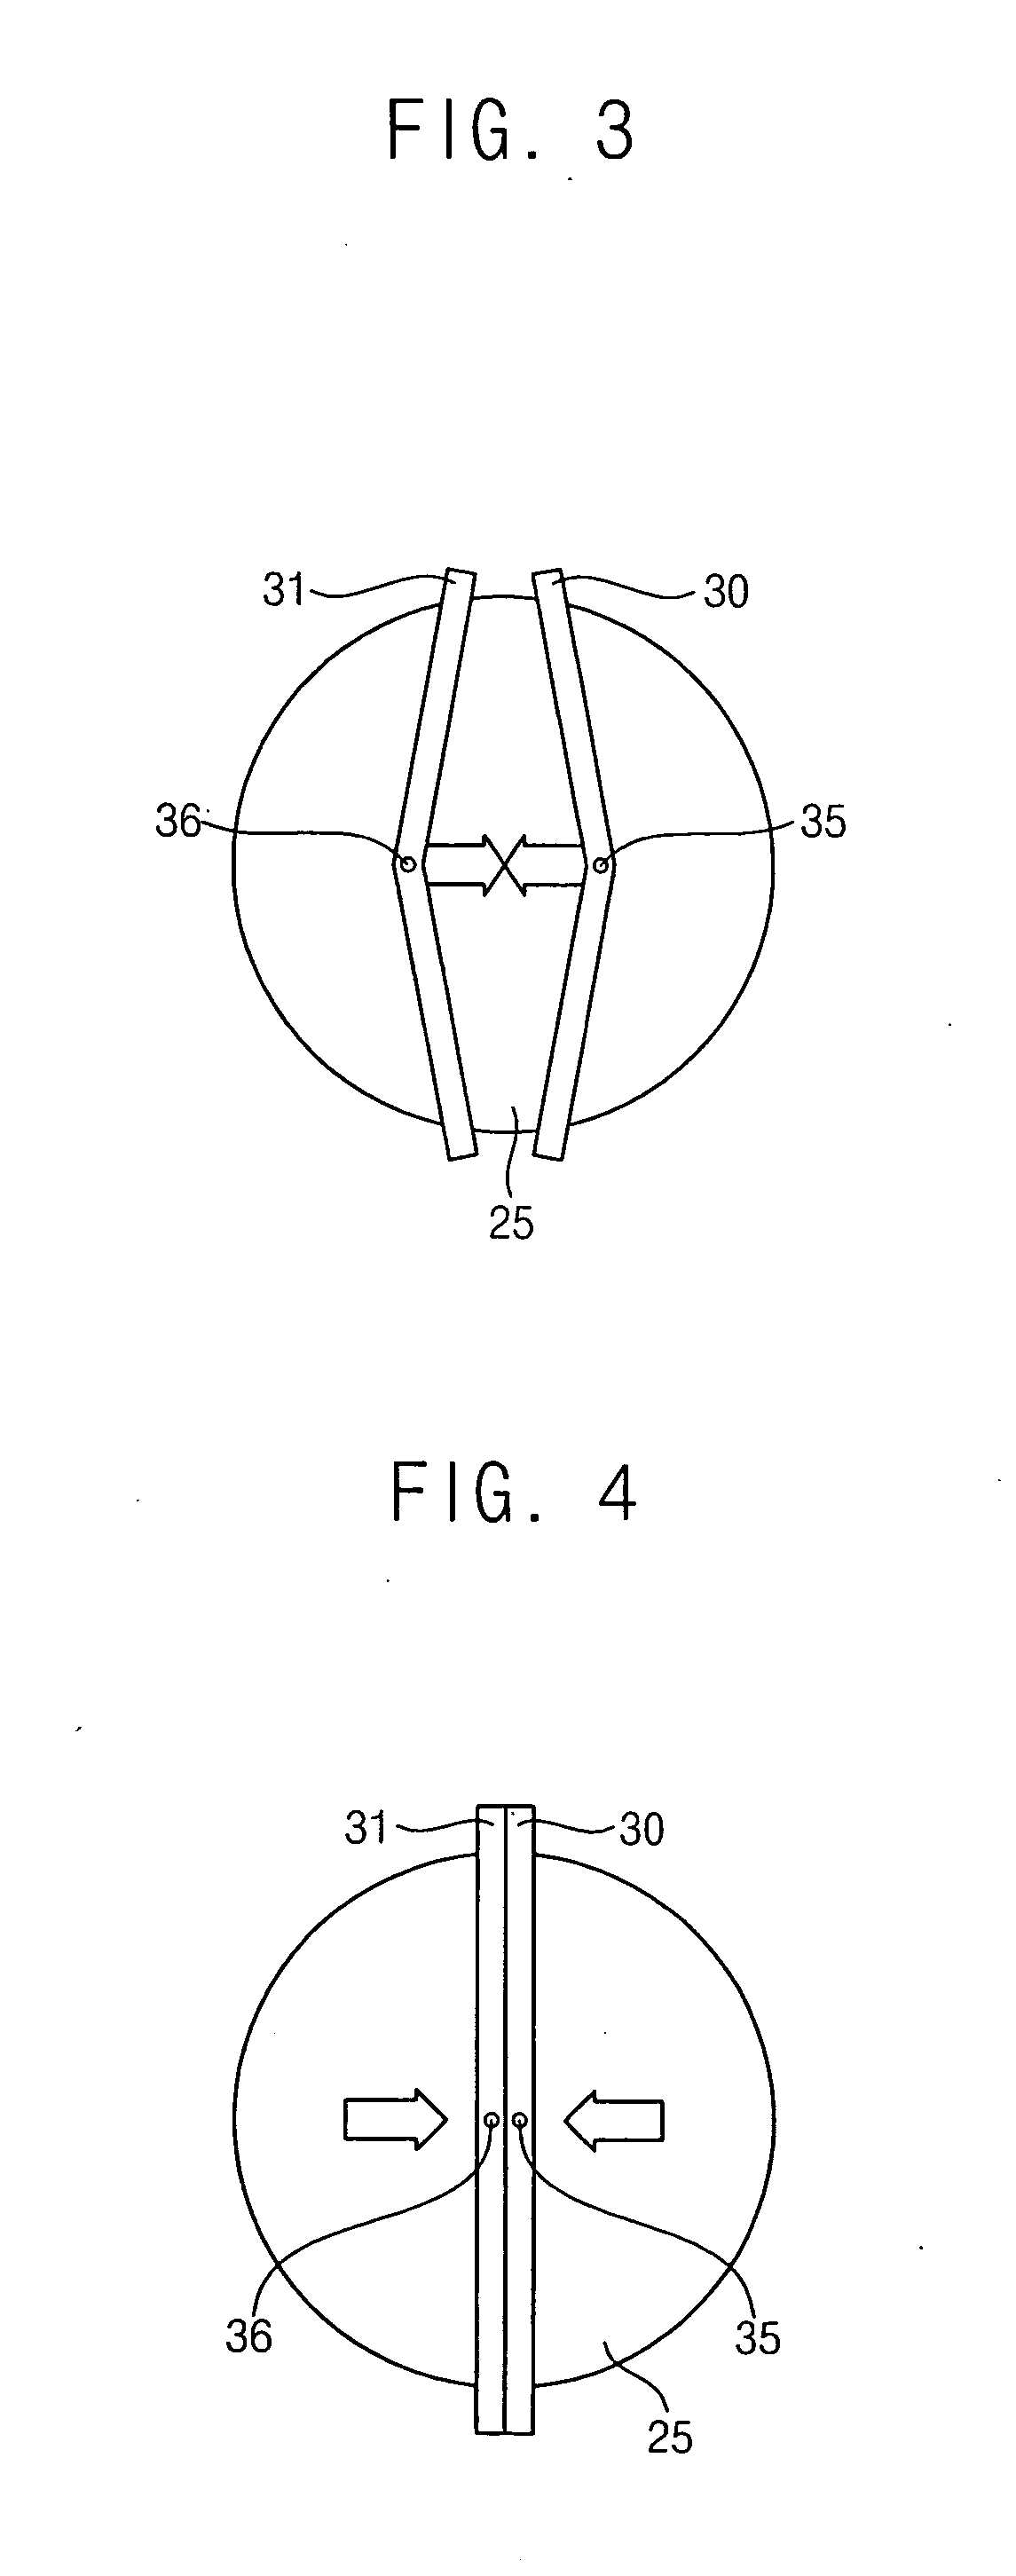 Apparatus including an improved nozzle unit